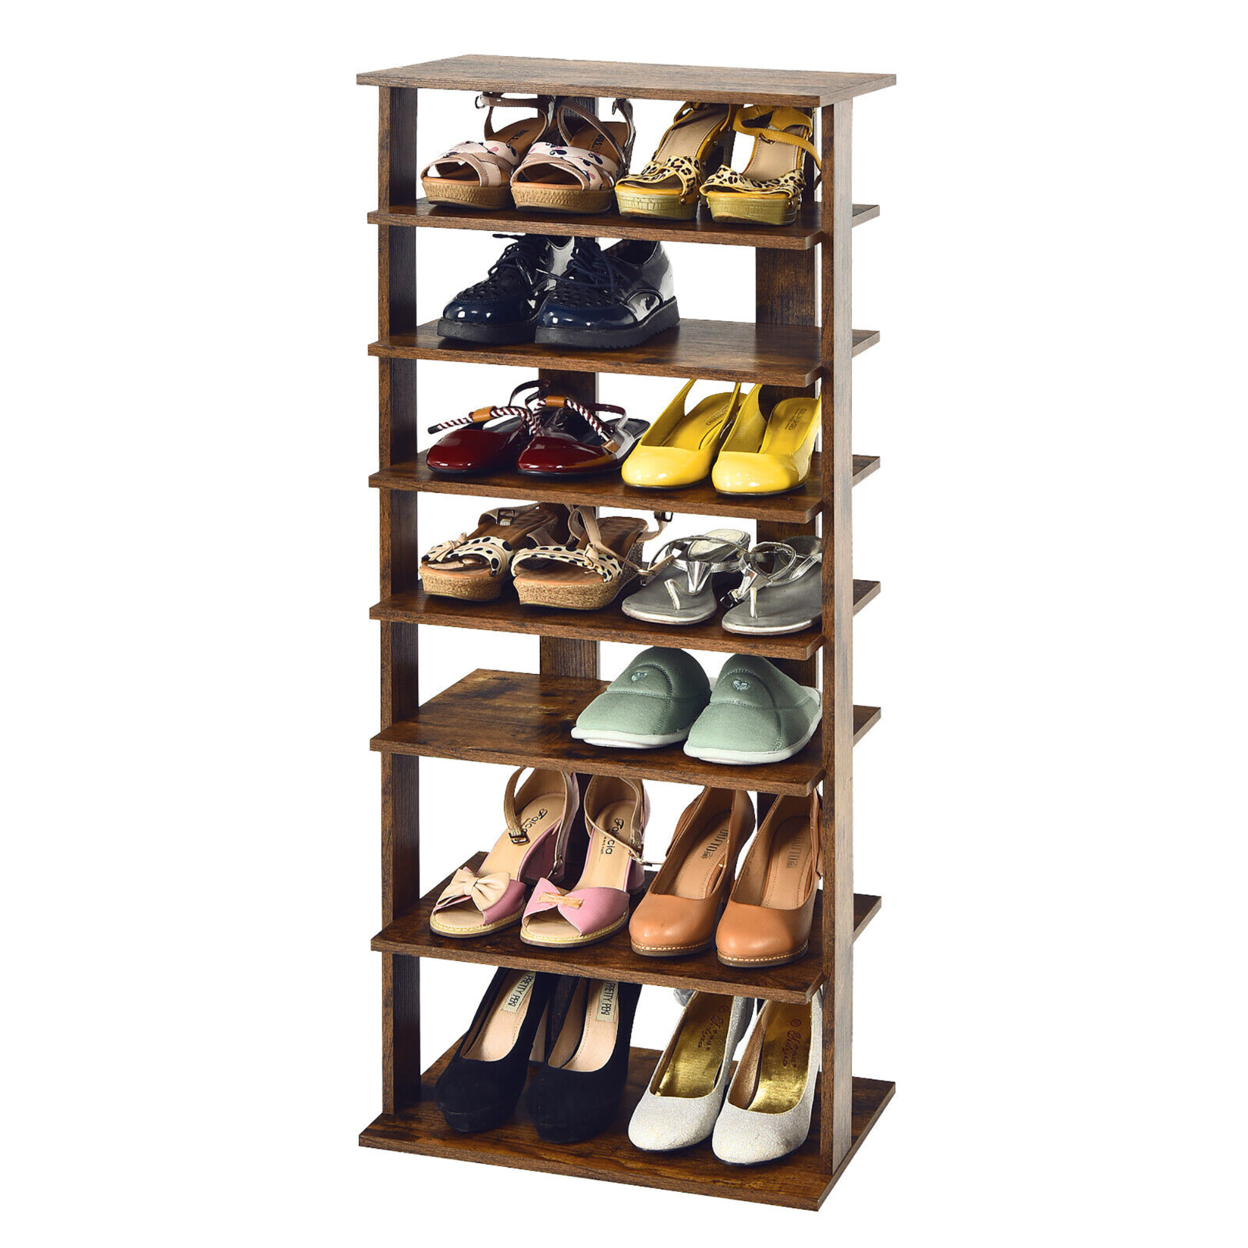 Patented 7-Tier Double Shoe Rack Free Standing Shelf Storage Tower Rustic Brown